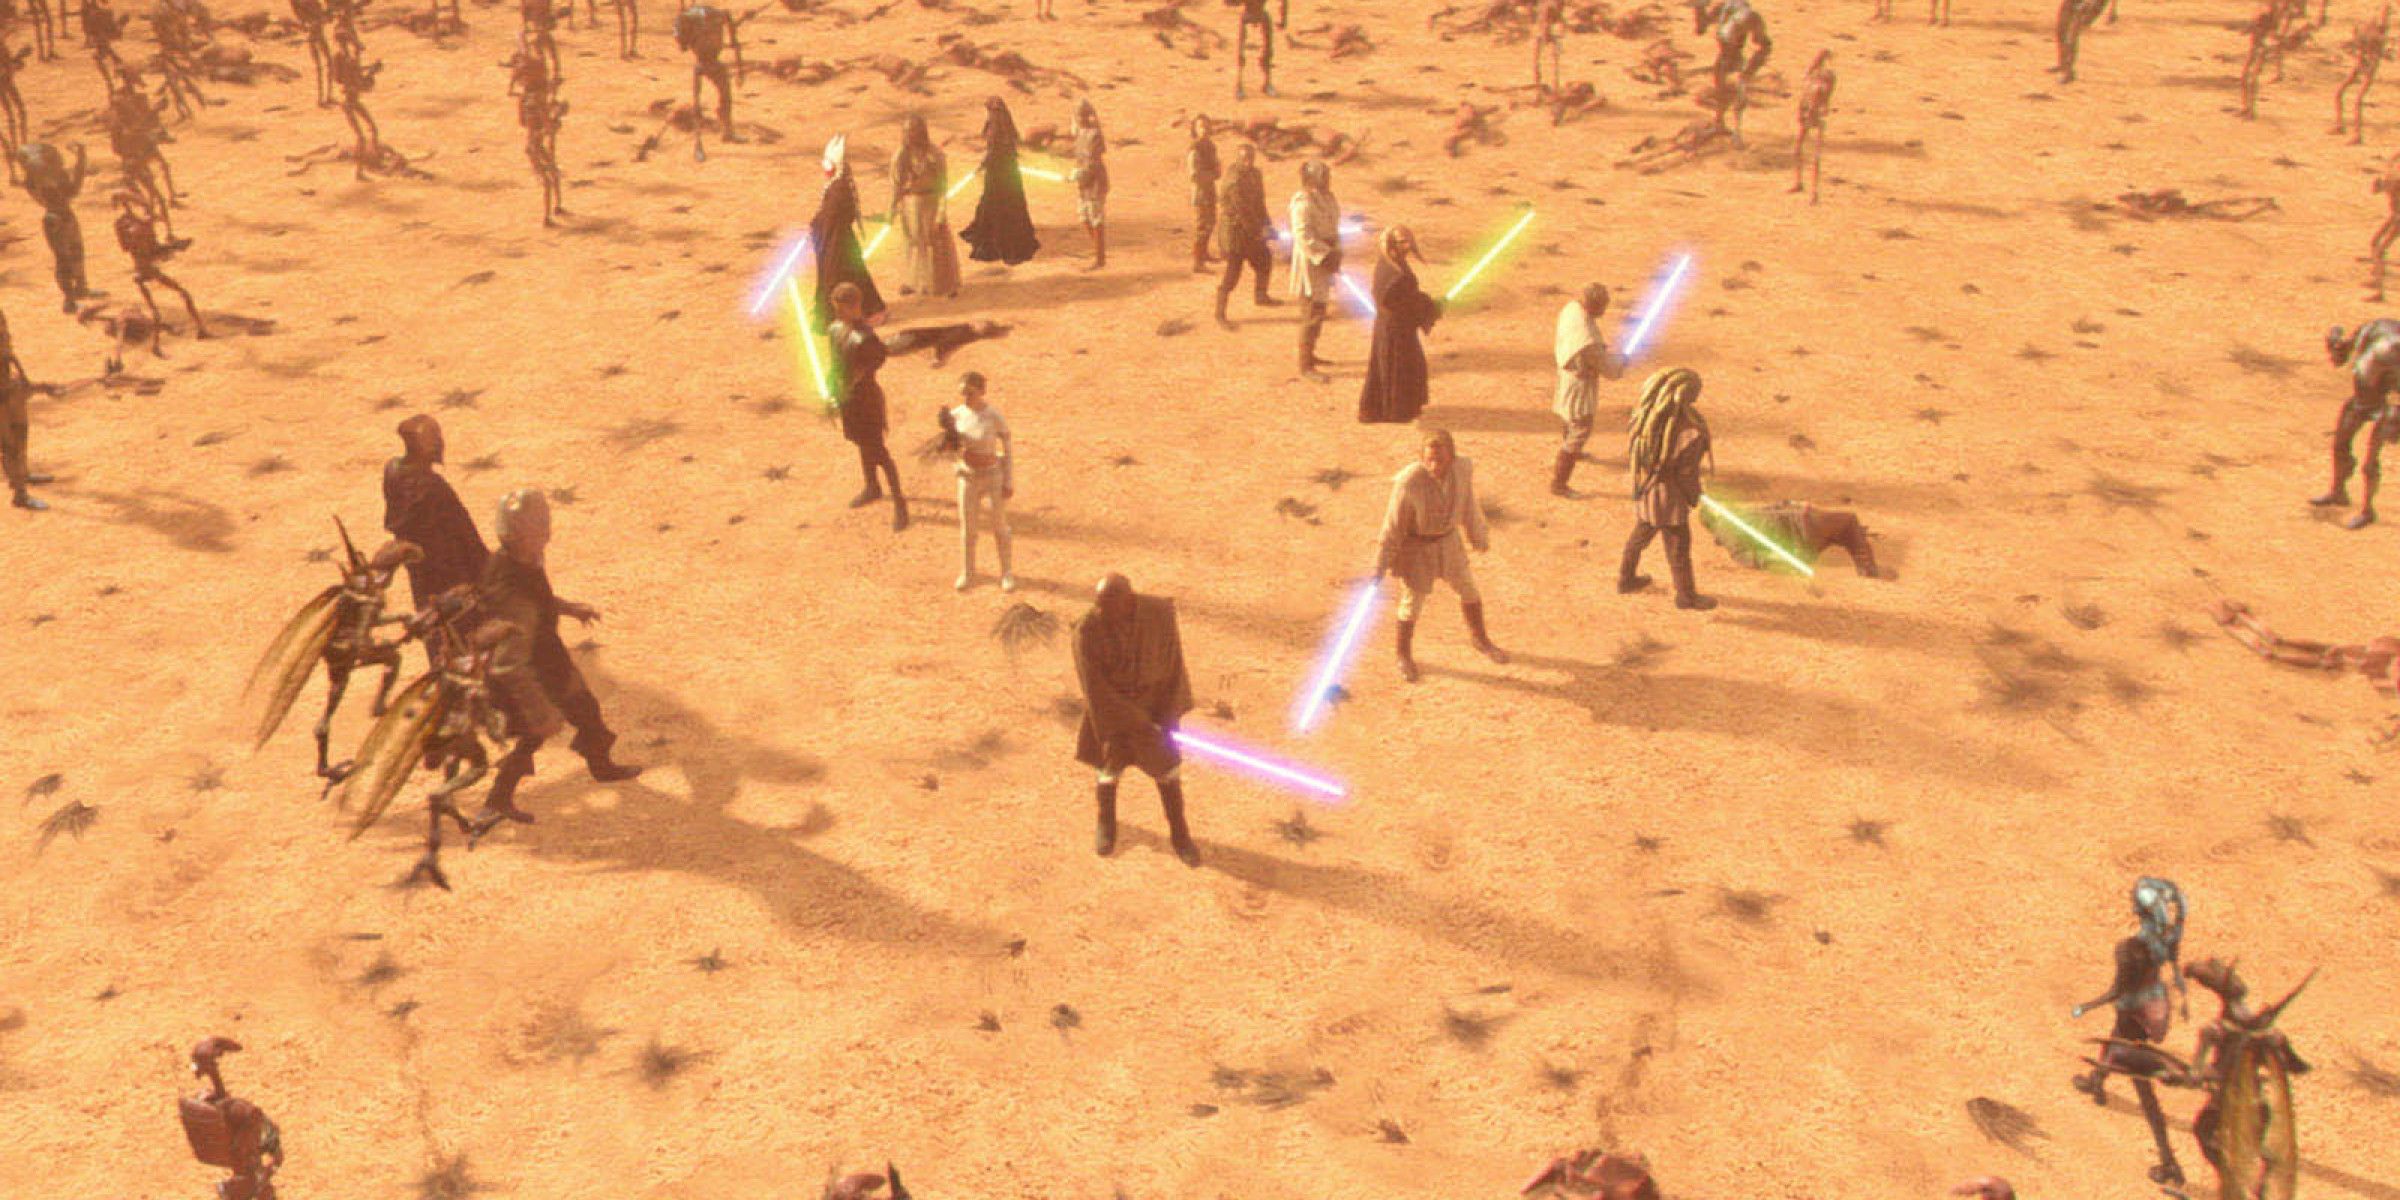 The Jedi await rescue from the clone troopers during the Battle of Geonosis